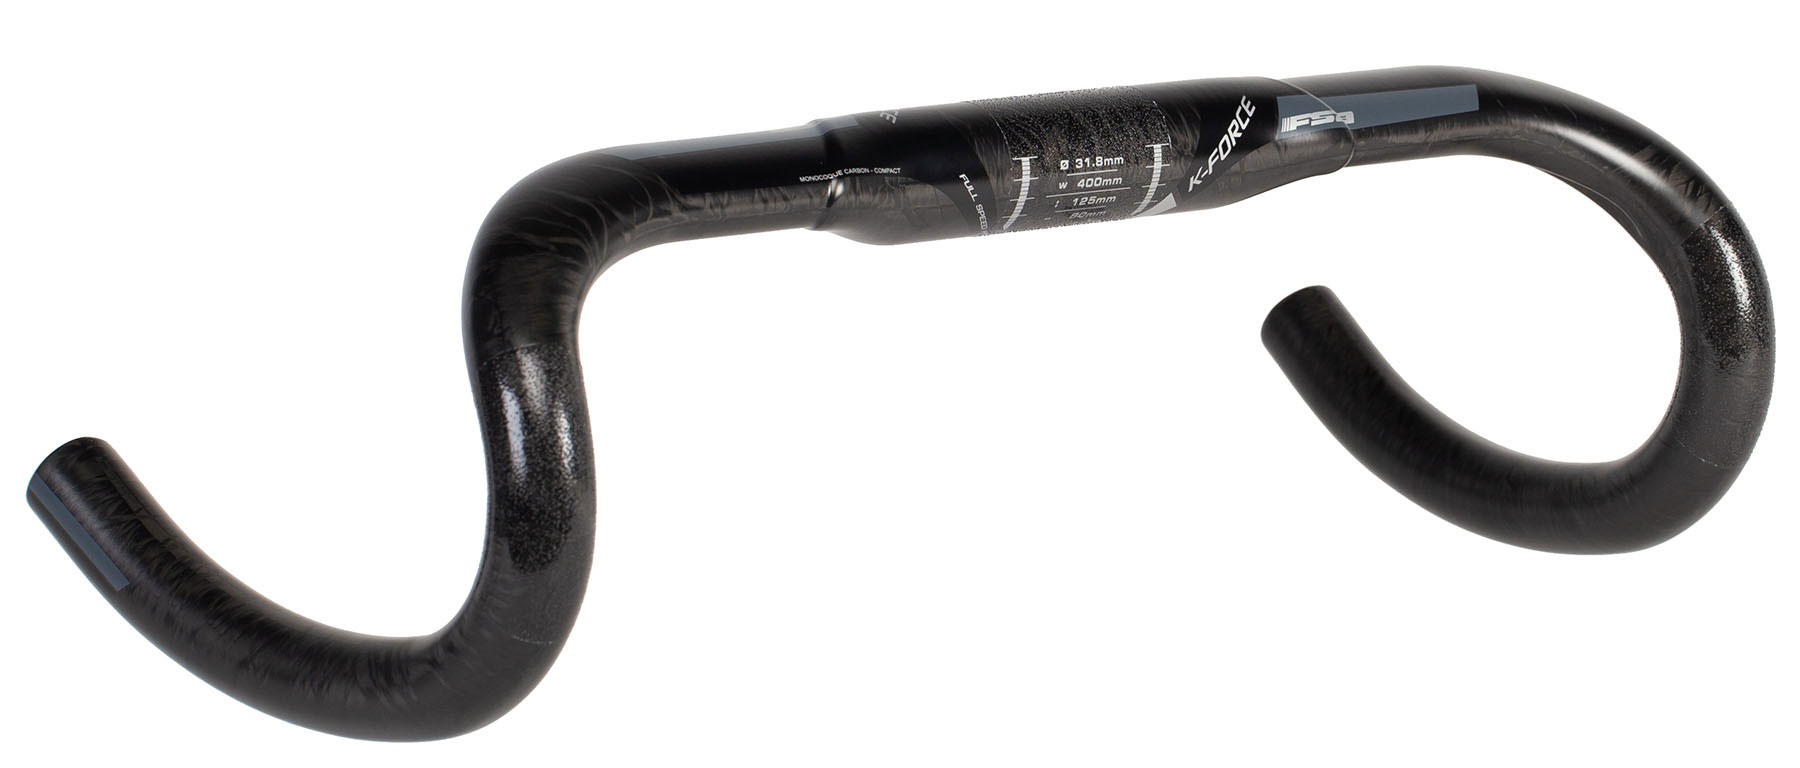 Full Speed Ahead K-Force Compact Carbon Handlebar